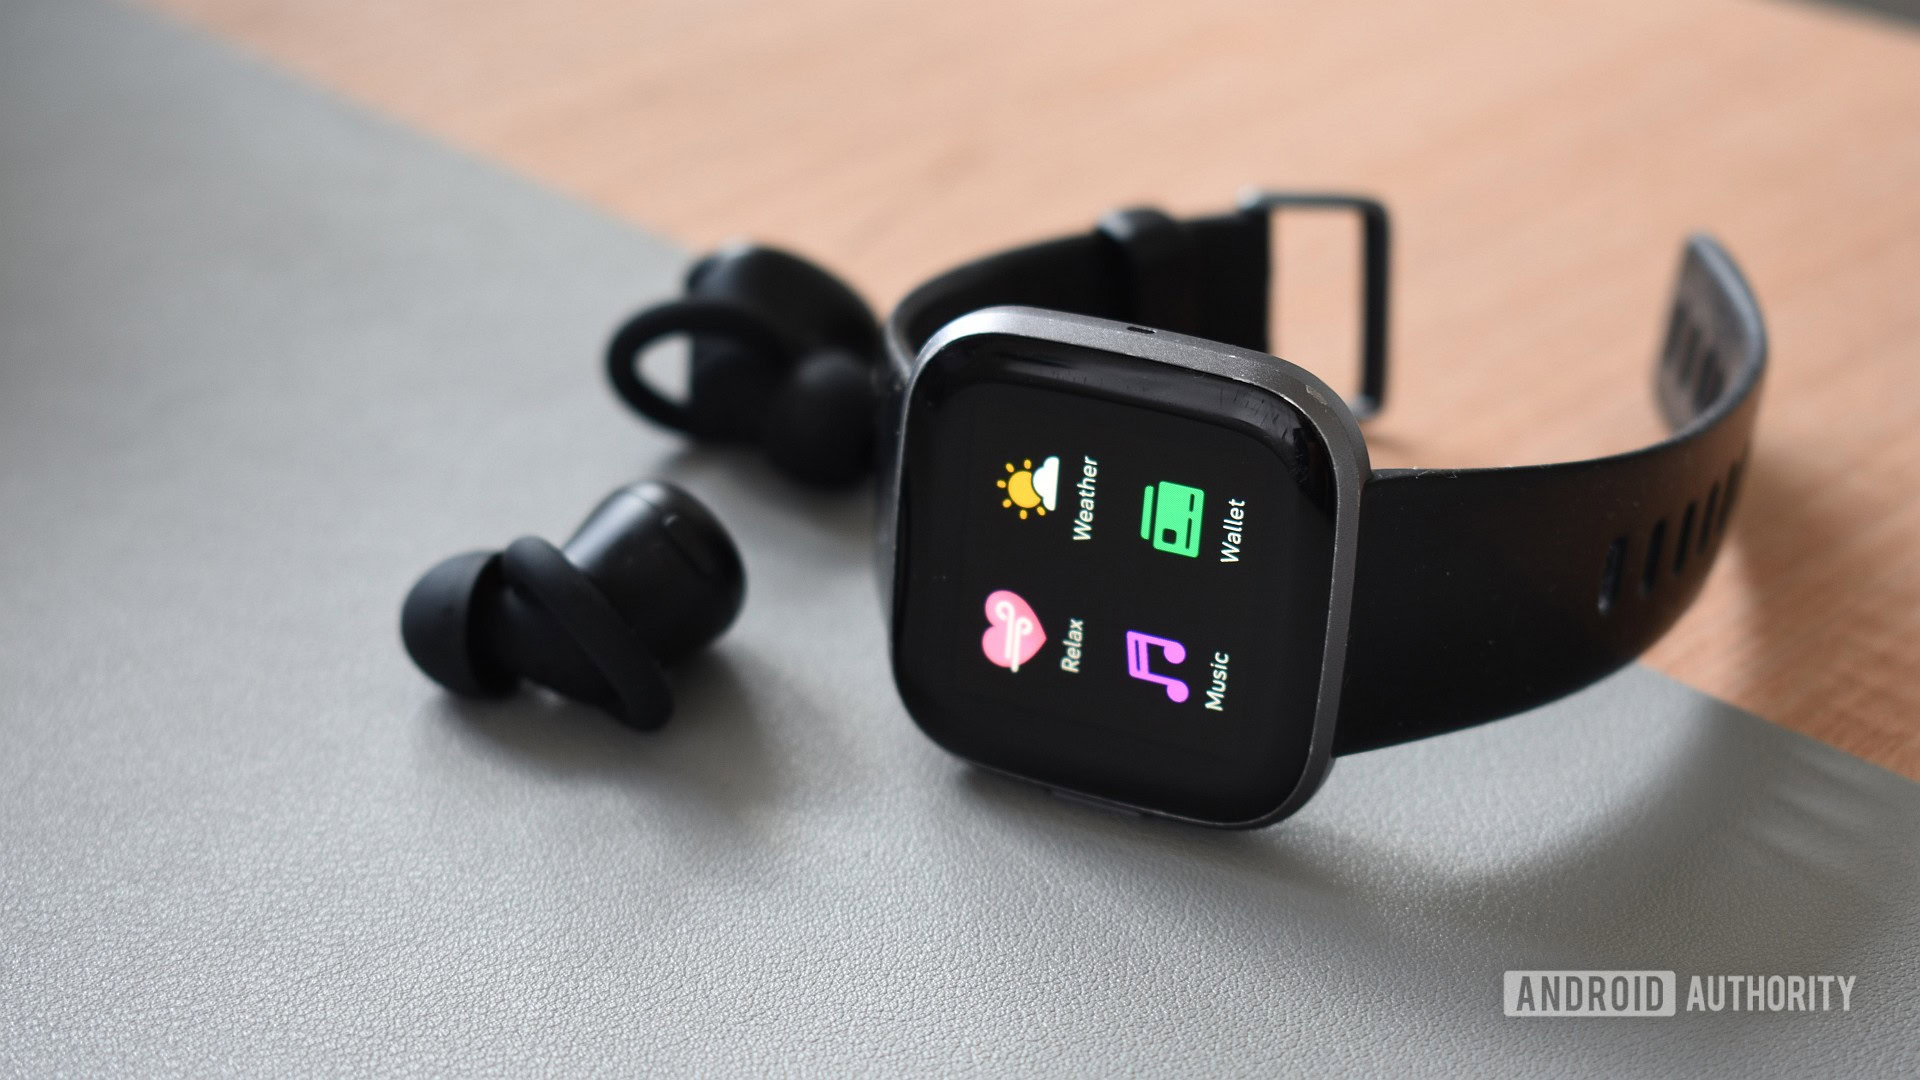 Banyan Schat snap Fitbit is removing the ability to transfer music from PCs to its devices